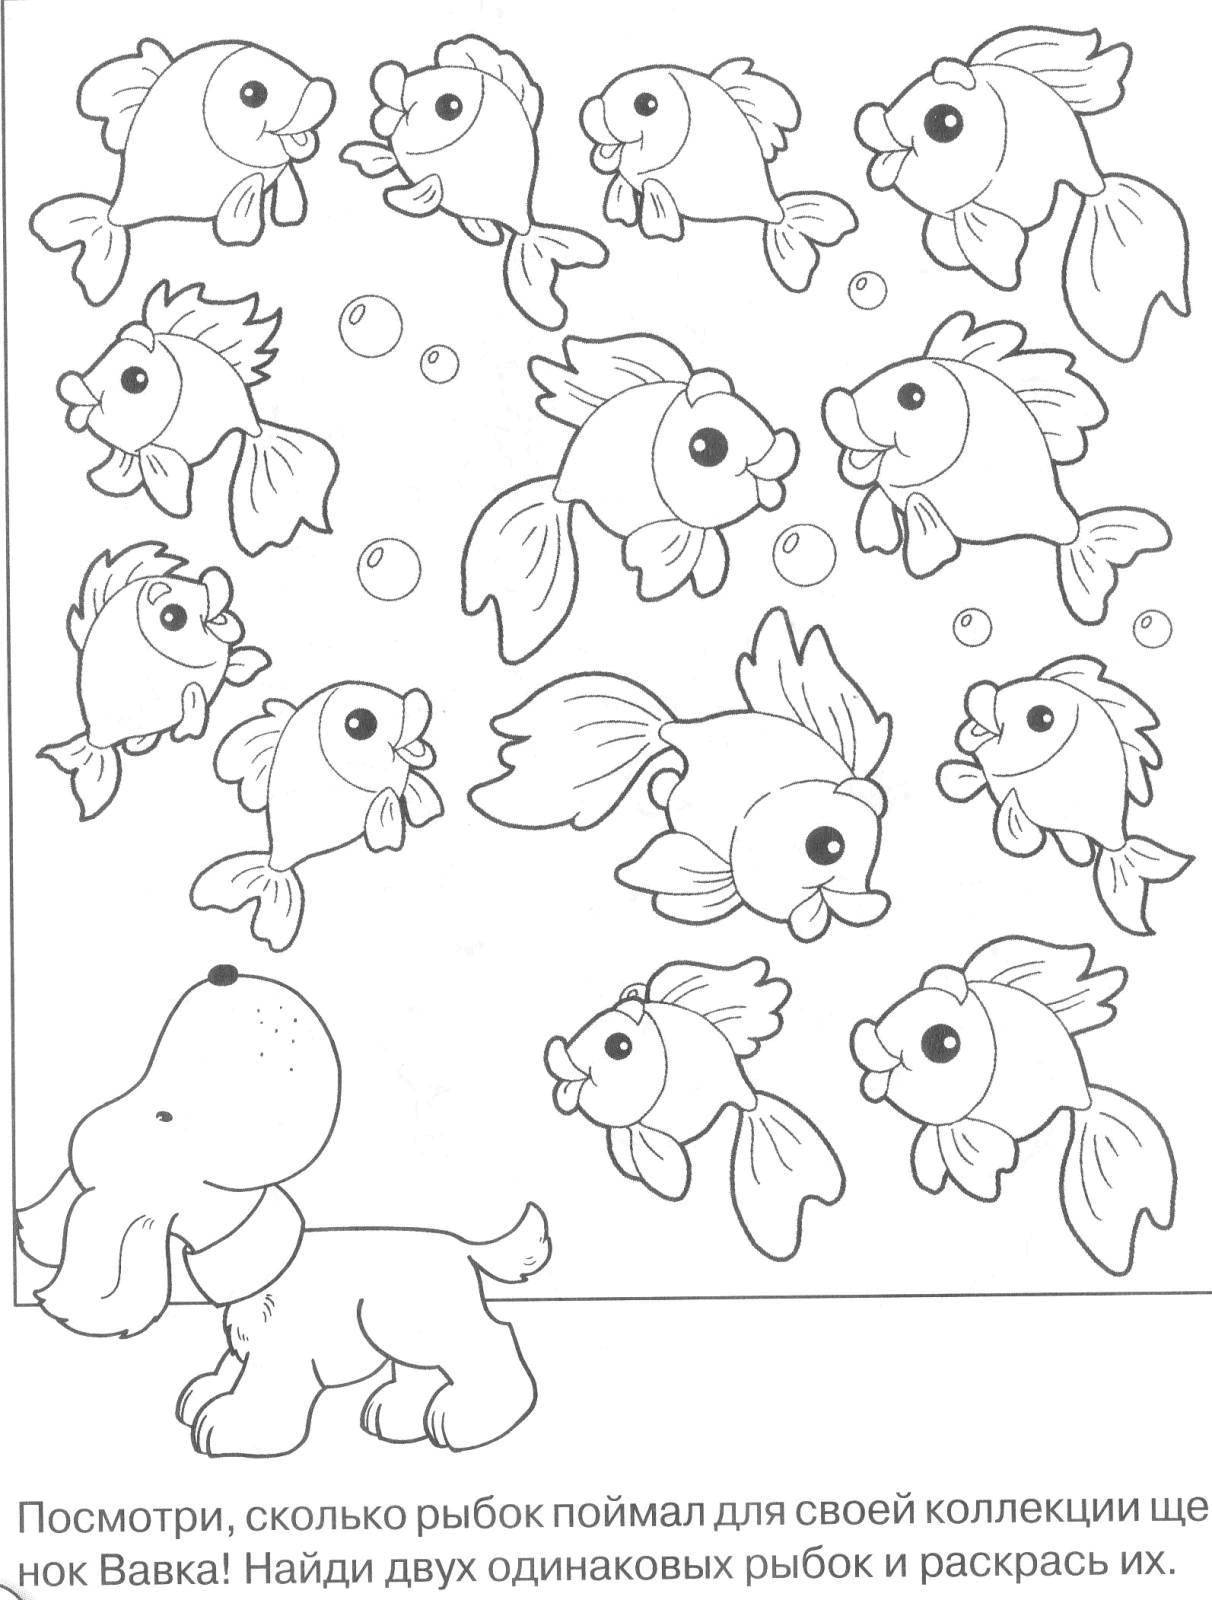 Coloring Paint the same fish. Category riddles for kids. Tags:  Teaching coloring, logic.